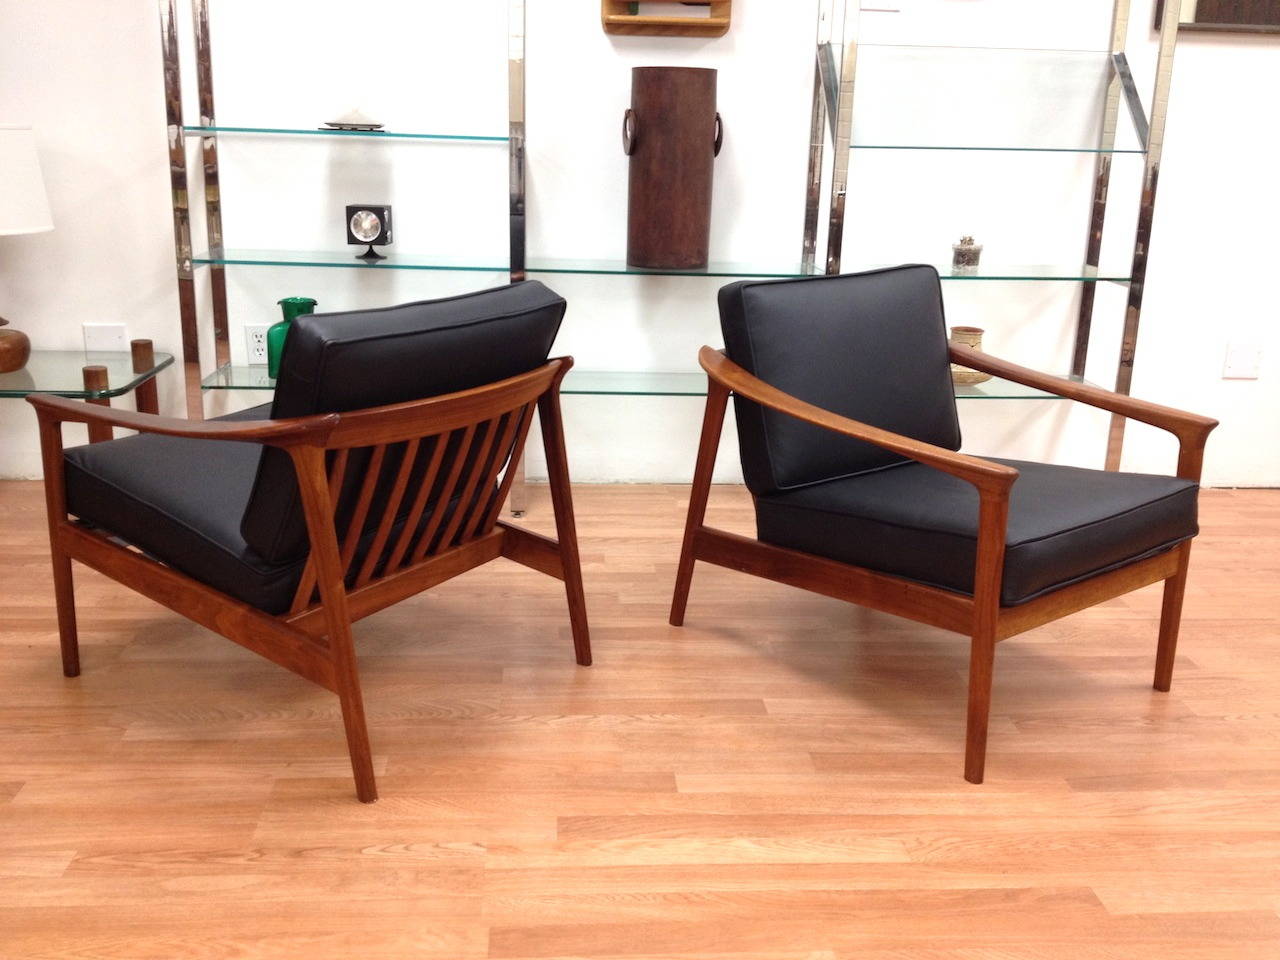 Mid-20th Century Pair of DUX Danish Modern Walnut Black Leather Lounge Chairs by Folke Ohlsson